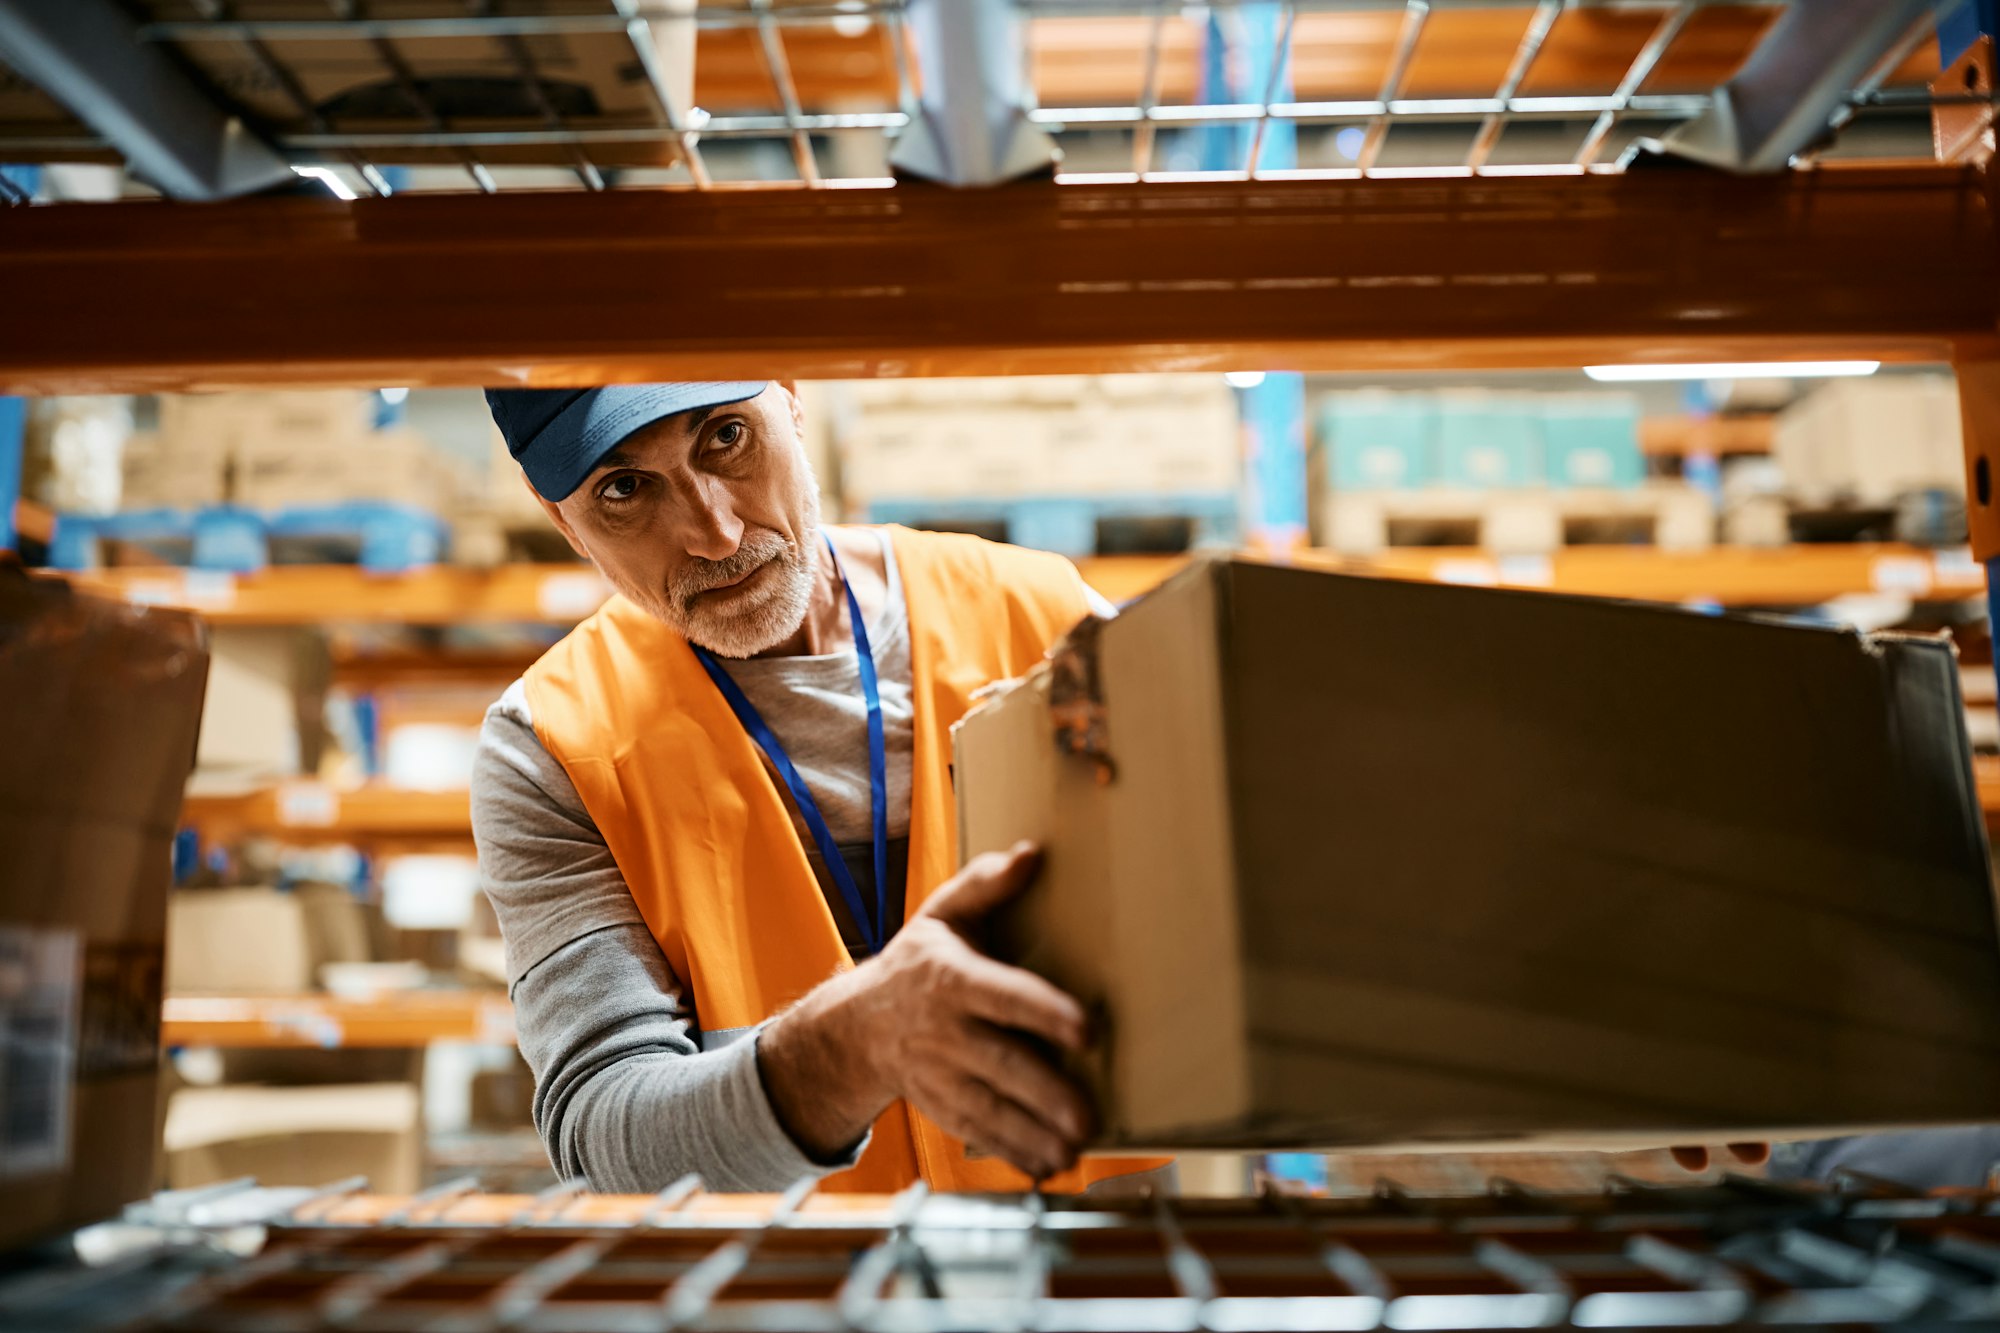 Mature worker stacking packages on racks while working at distribution warehouse.